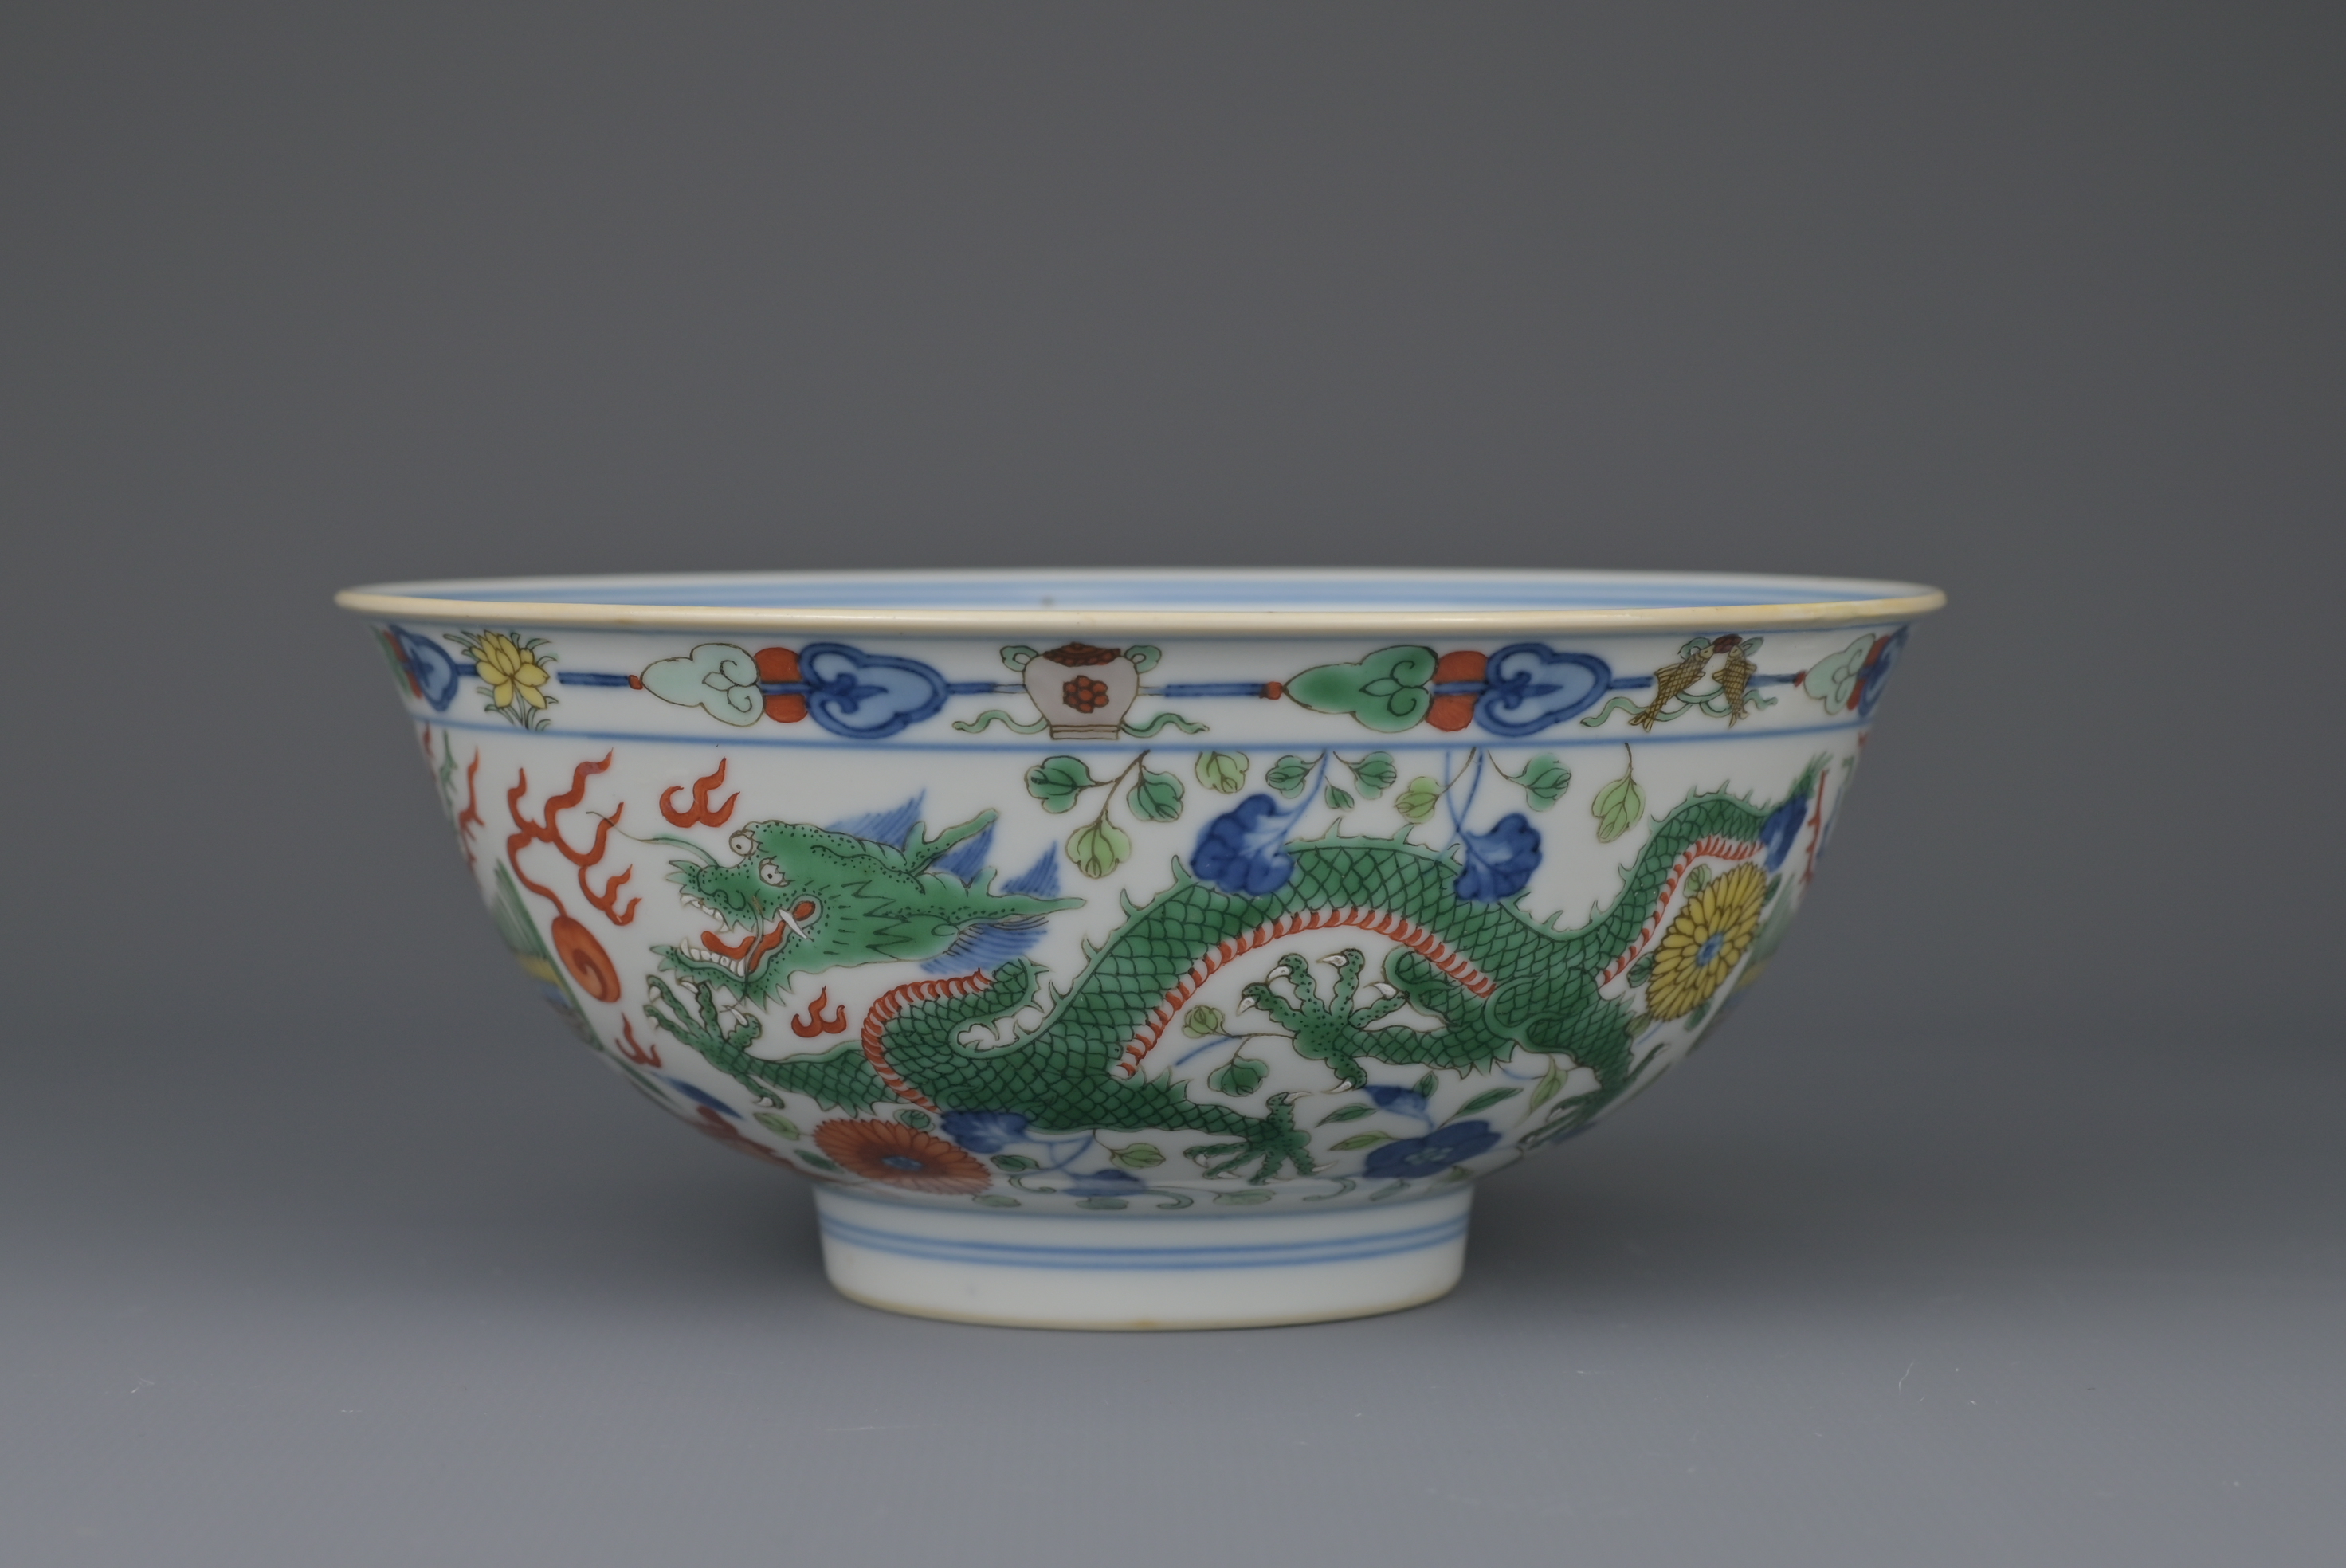 FINE CHINESE WUCAI ‘DRAGON & PHOENIX’ PORCELAIN BOWL, JIAQING MARK AND PERIOD, EARLY 19th CENTURY - Image 5 of 14